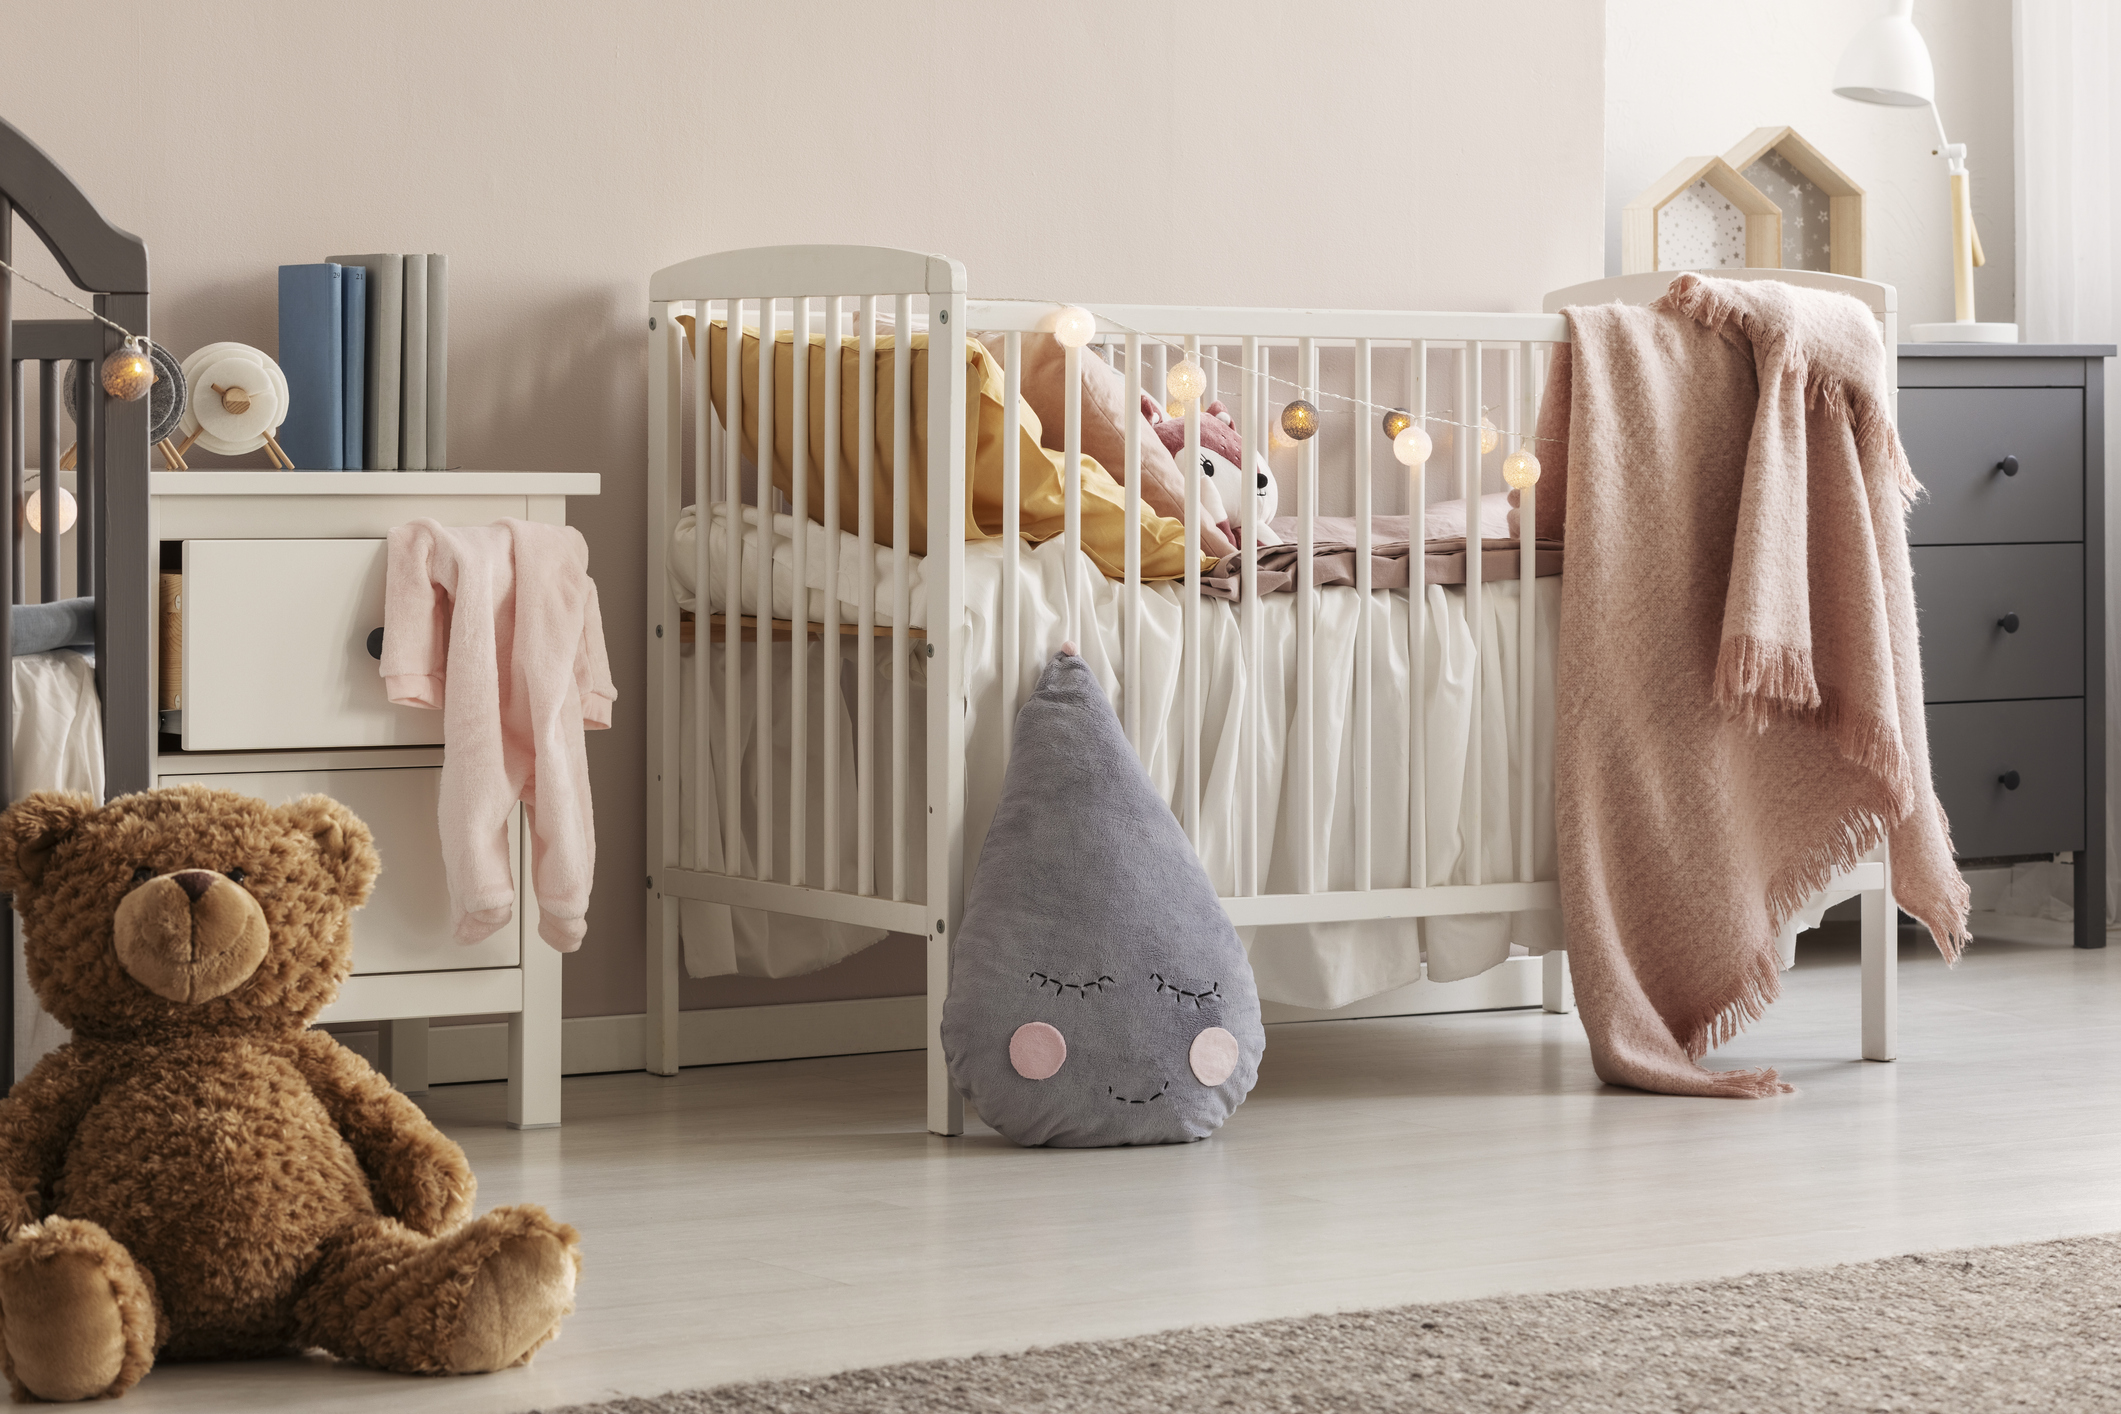 Blush pink nursery with a crib and stuffed bear in the corner